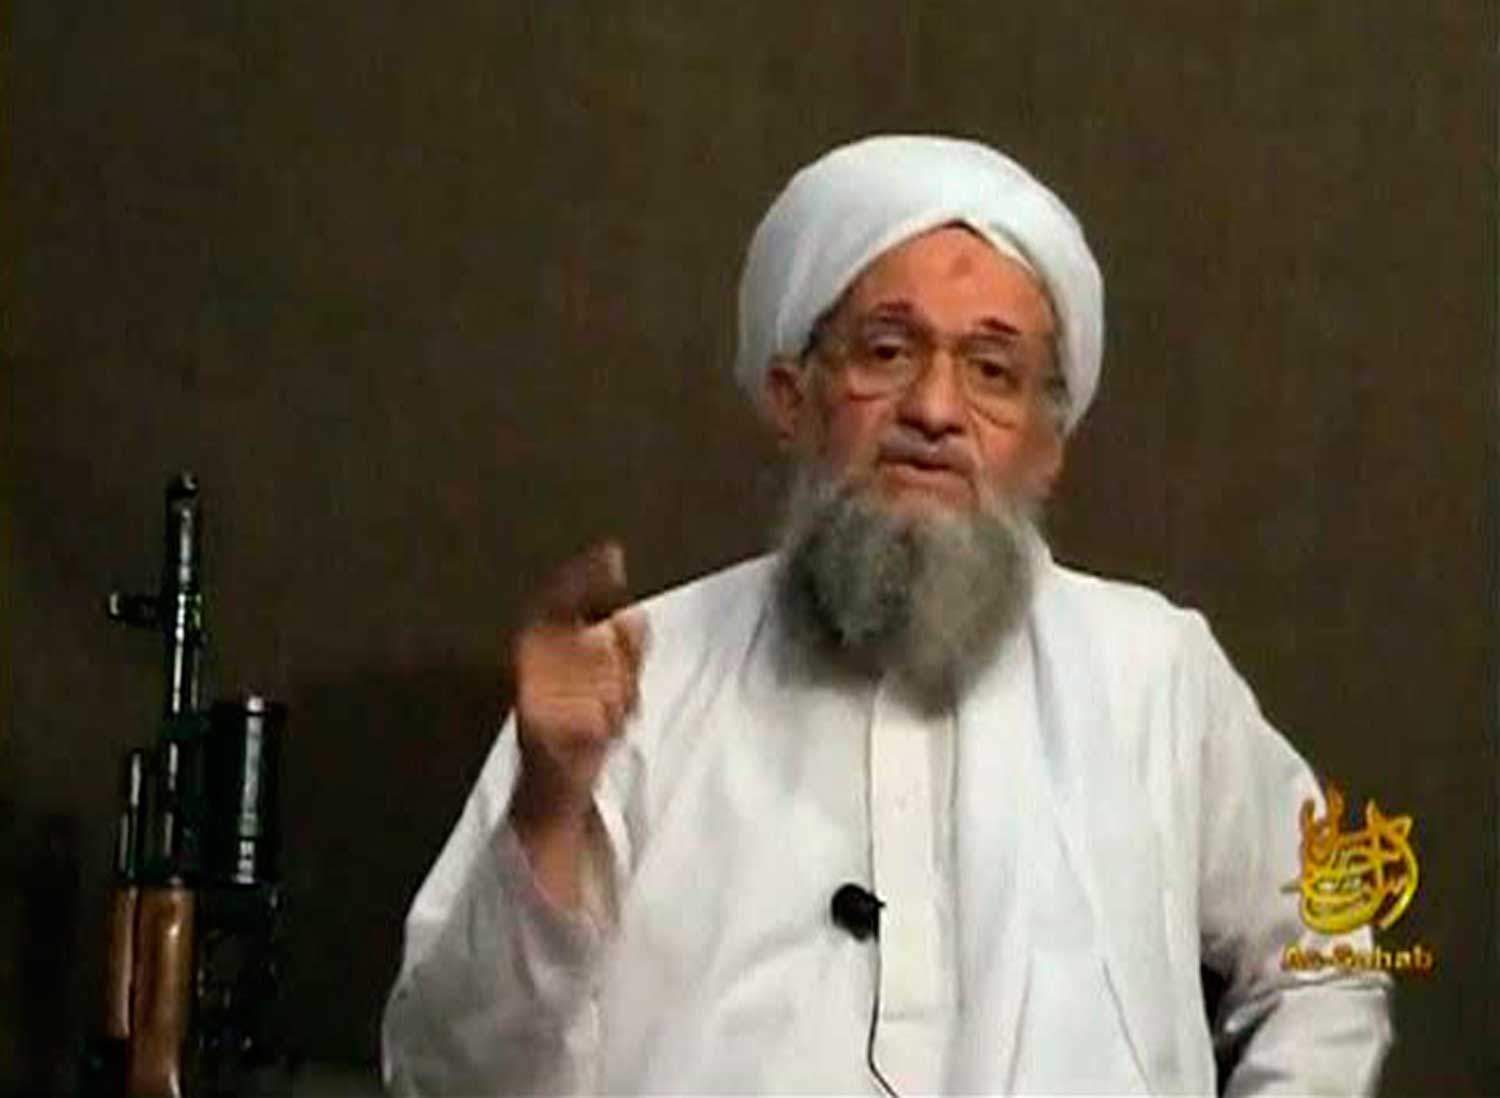 Al Qaeda's second-in-command Ayman al-Zawahri speaks from an unknown location, in this still image taken from video uploaded on a social media website June 8, 2011. (Reuters)